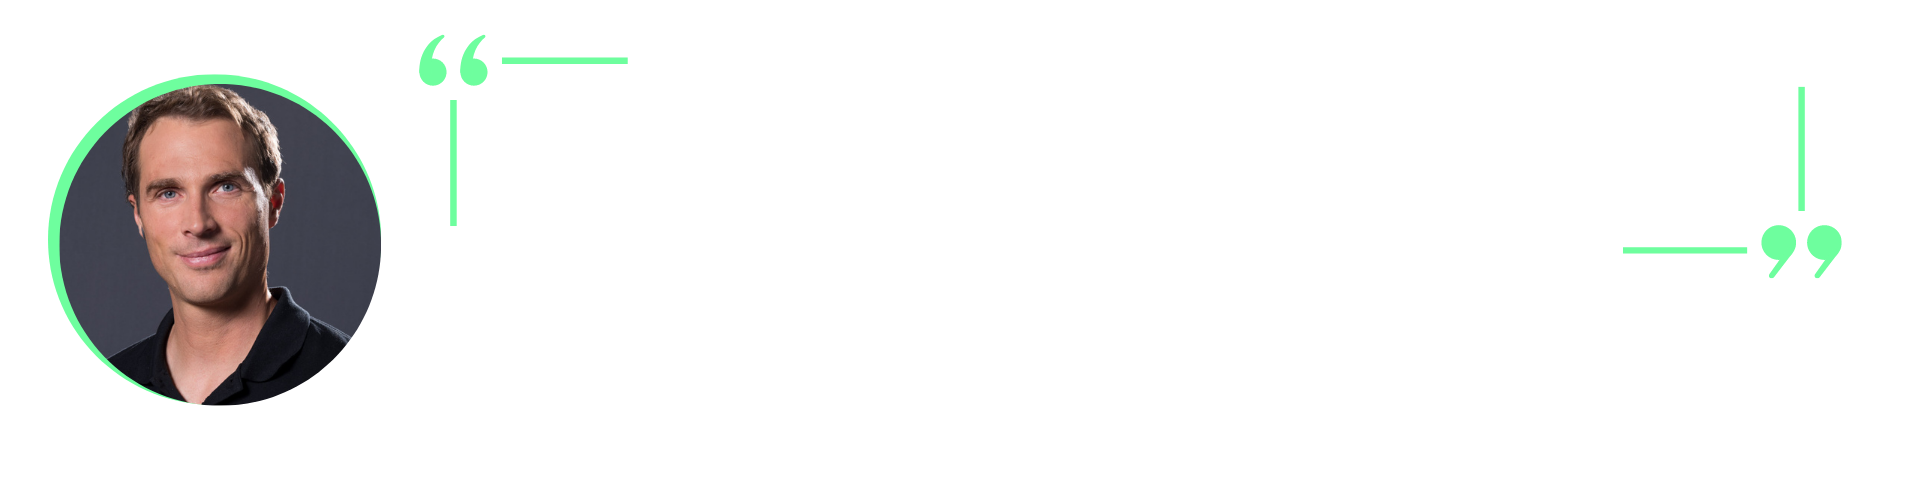 Doctor Vincent Costalat's quotation: 